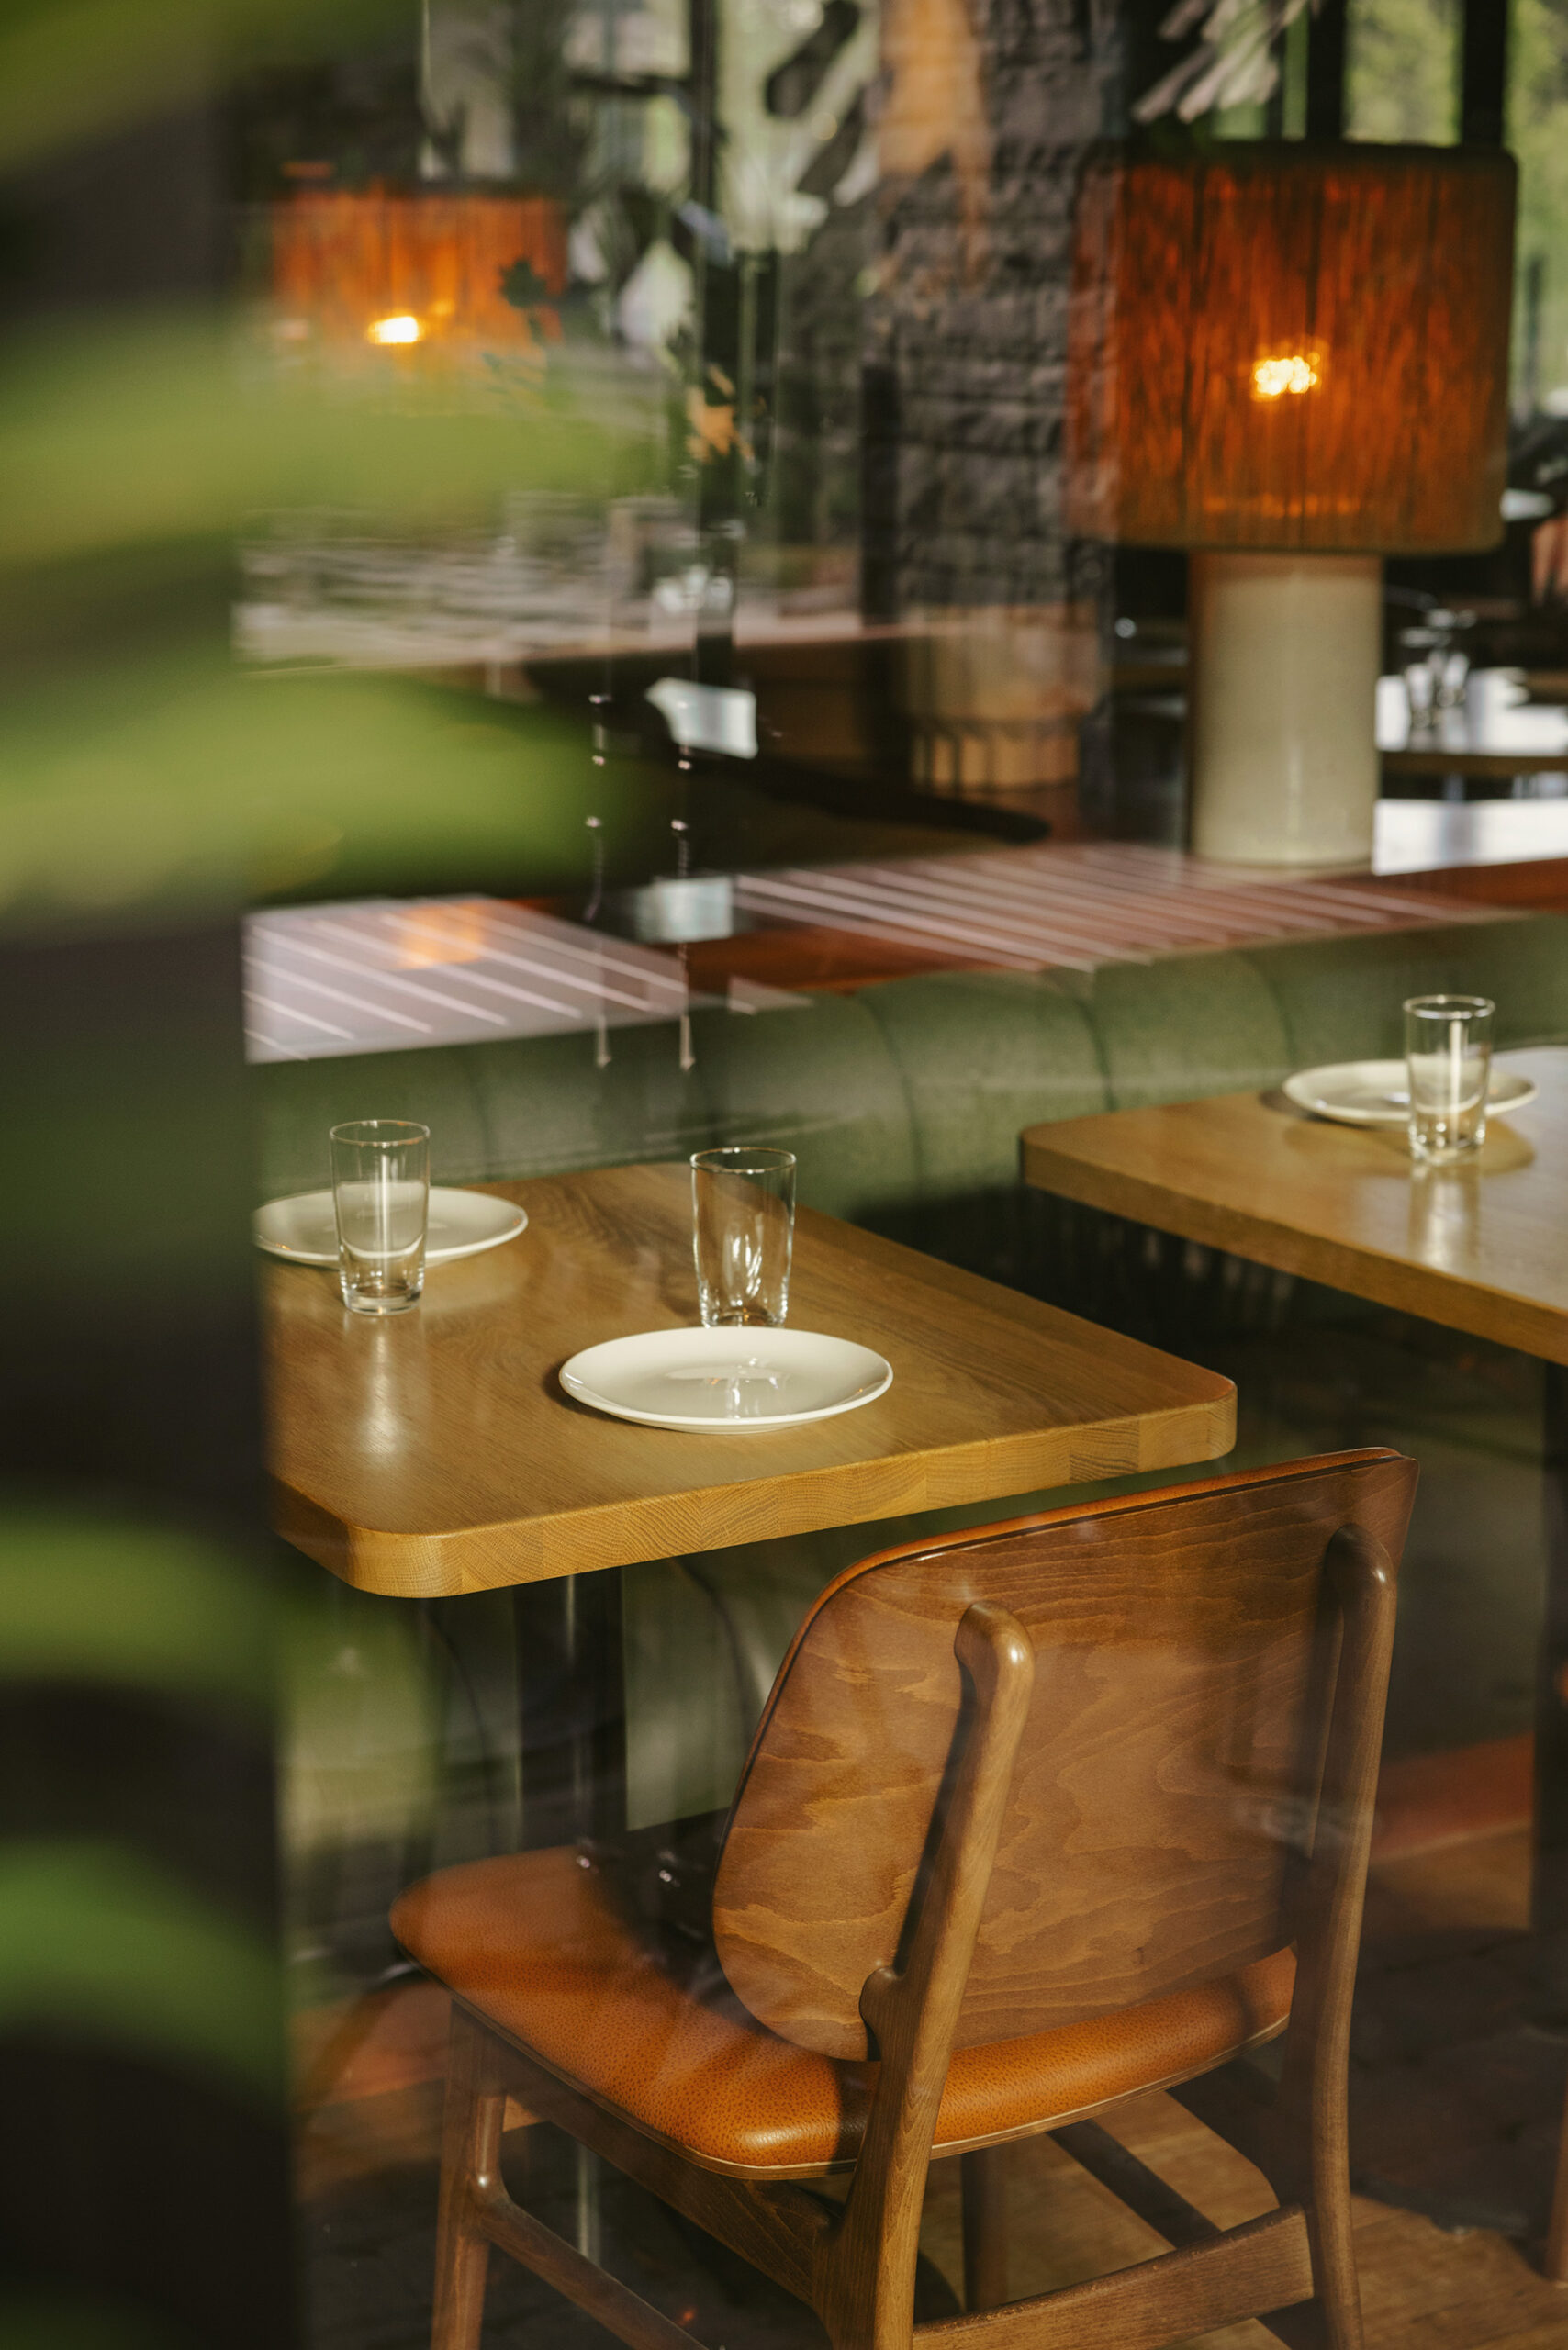 An artistic view through a window and plant leaves of a restaurant table. On one side of the table is a wooden chair with a leather seat. On the other side is a green fabric banquette.